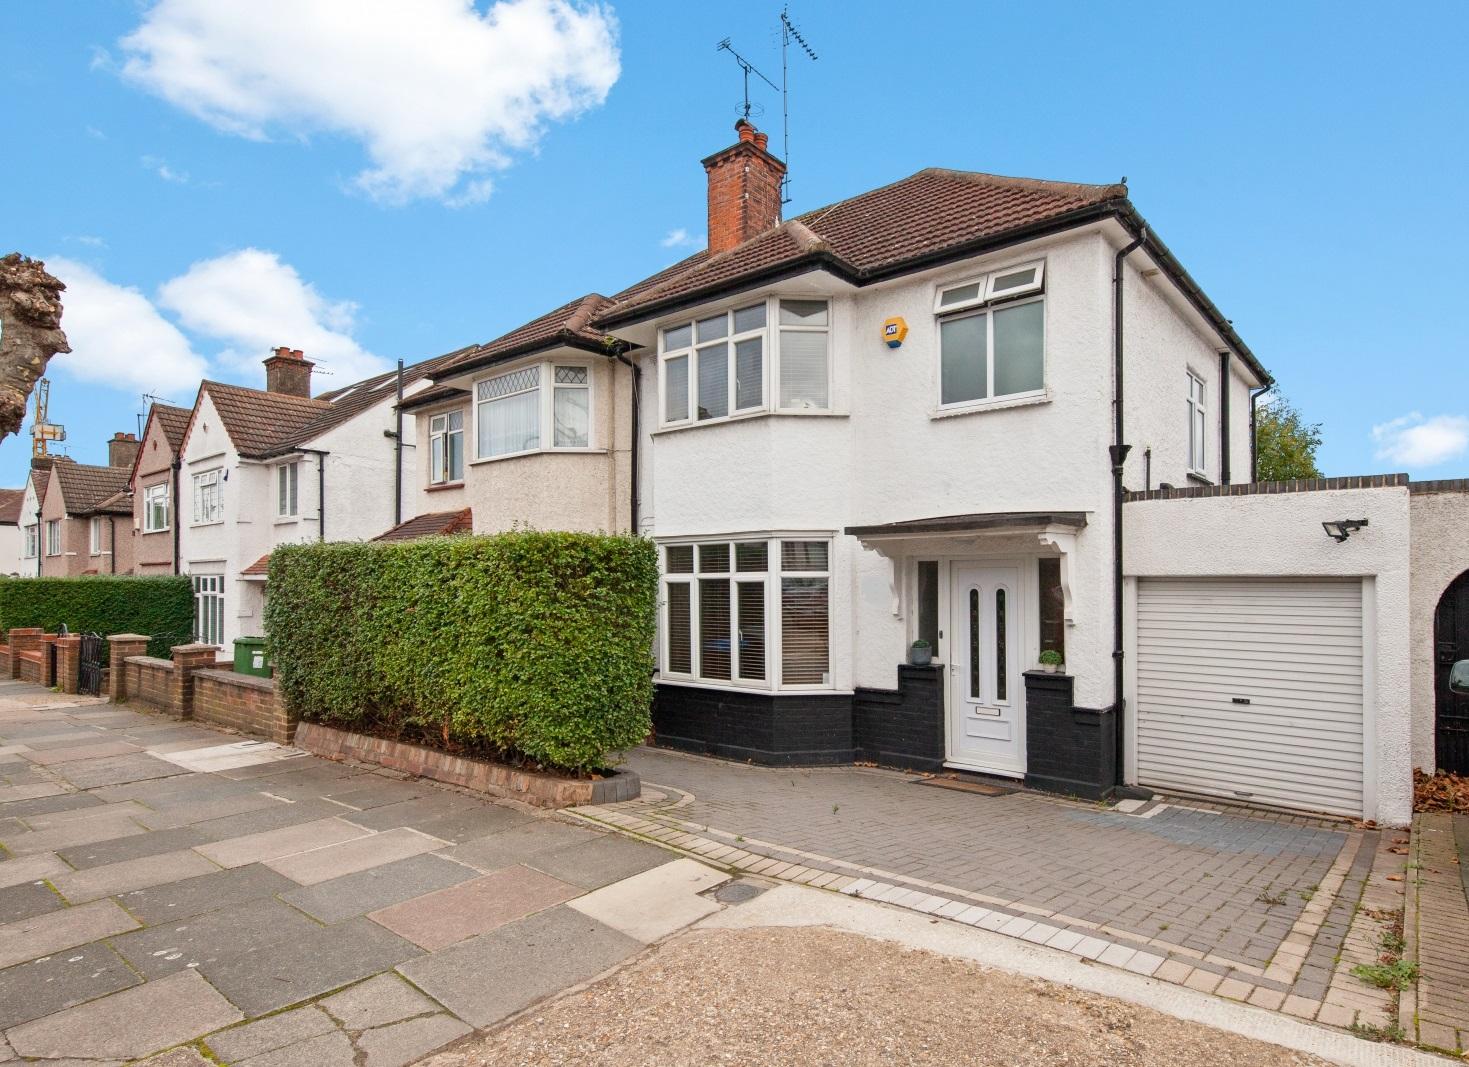 4 Bedroom Semi Detached to rent in Dollis Hill, London, NW2